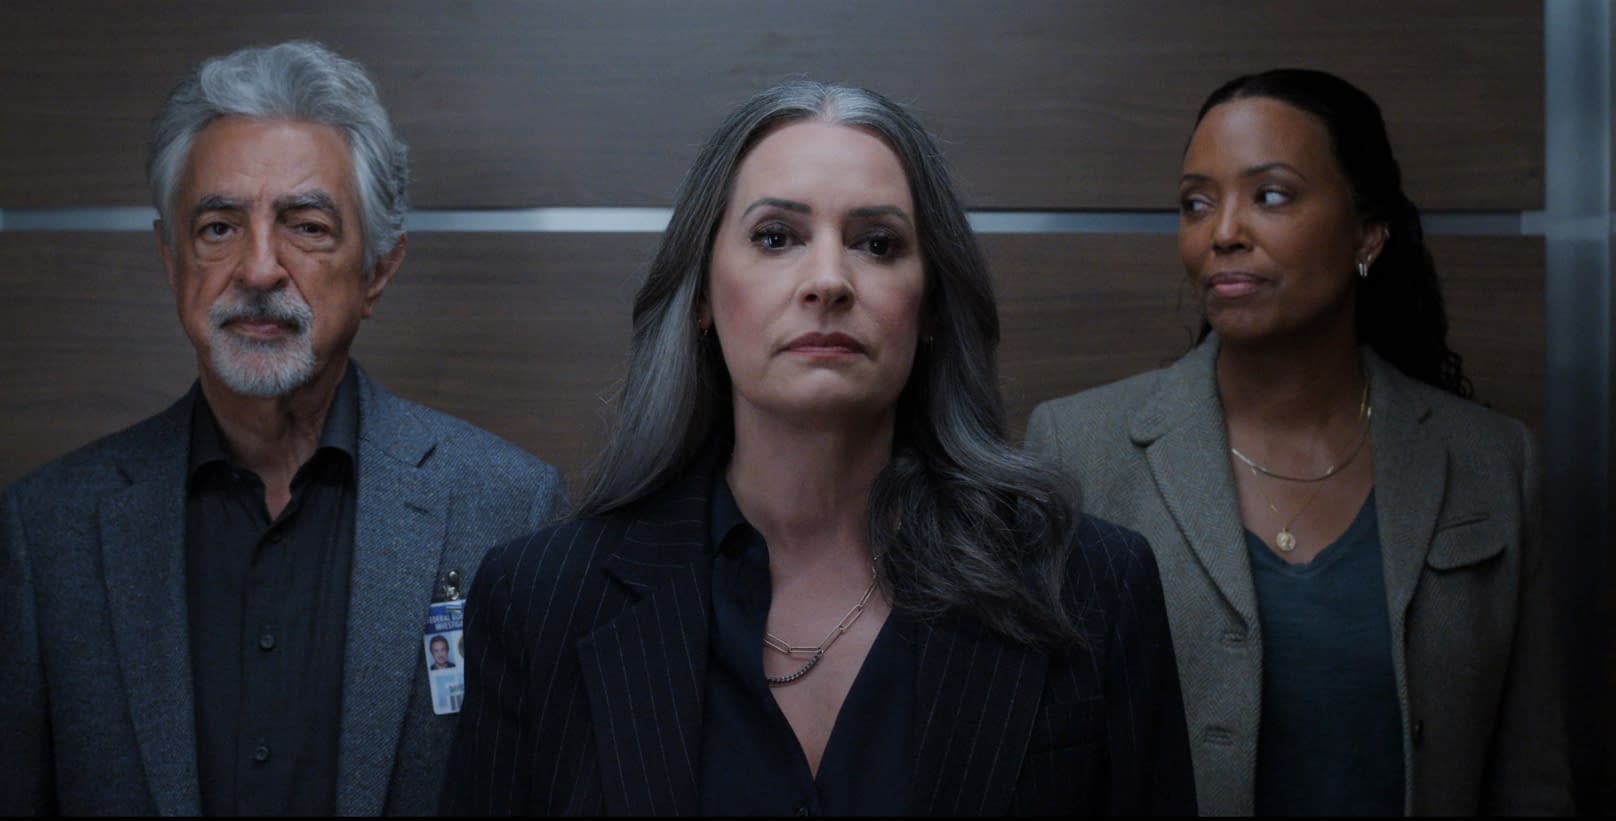 Criminal Minds Evolution Ep. 6 Images Answers Lead to More Questions